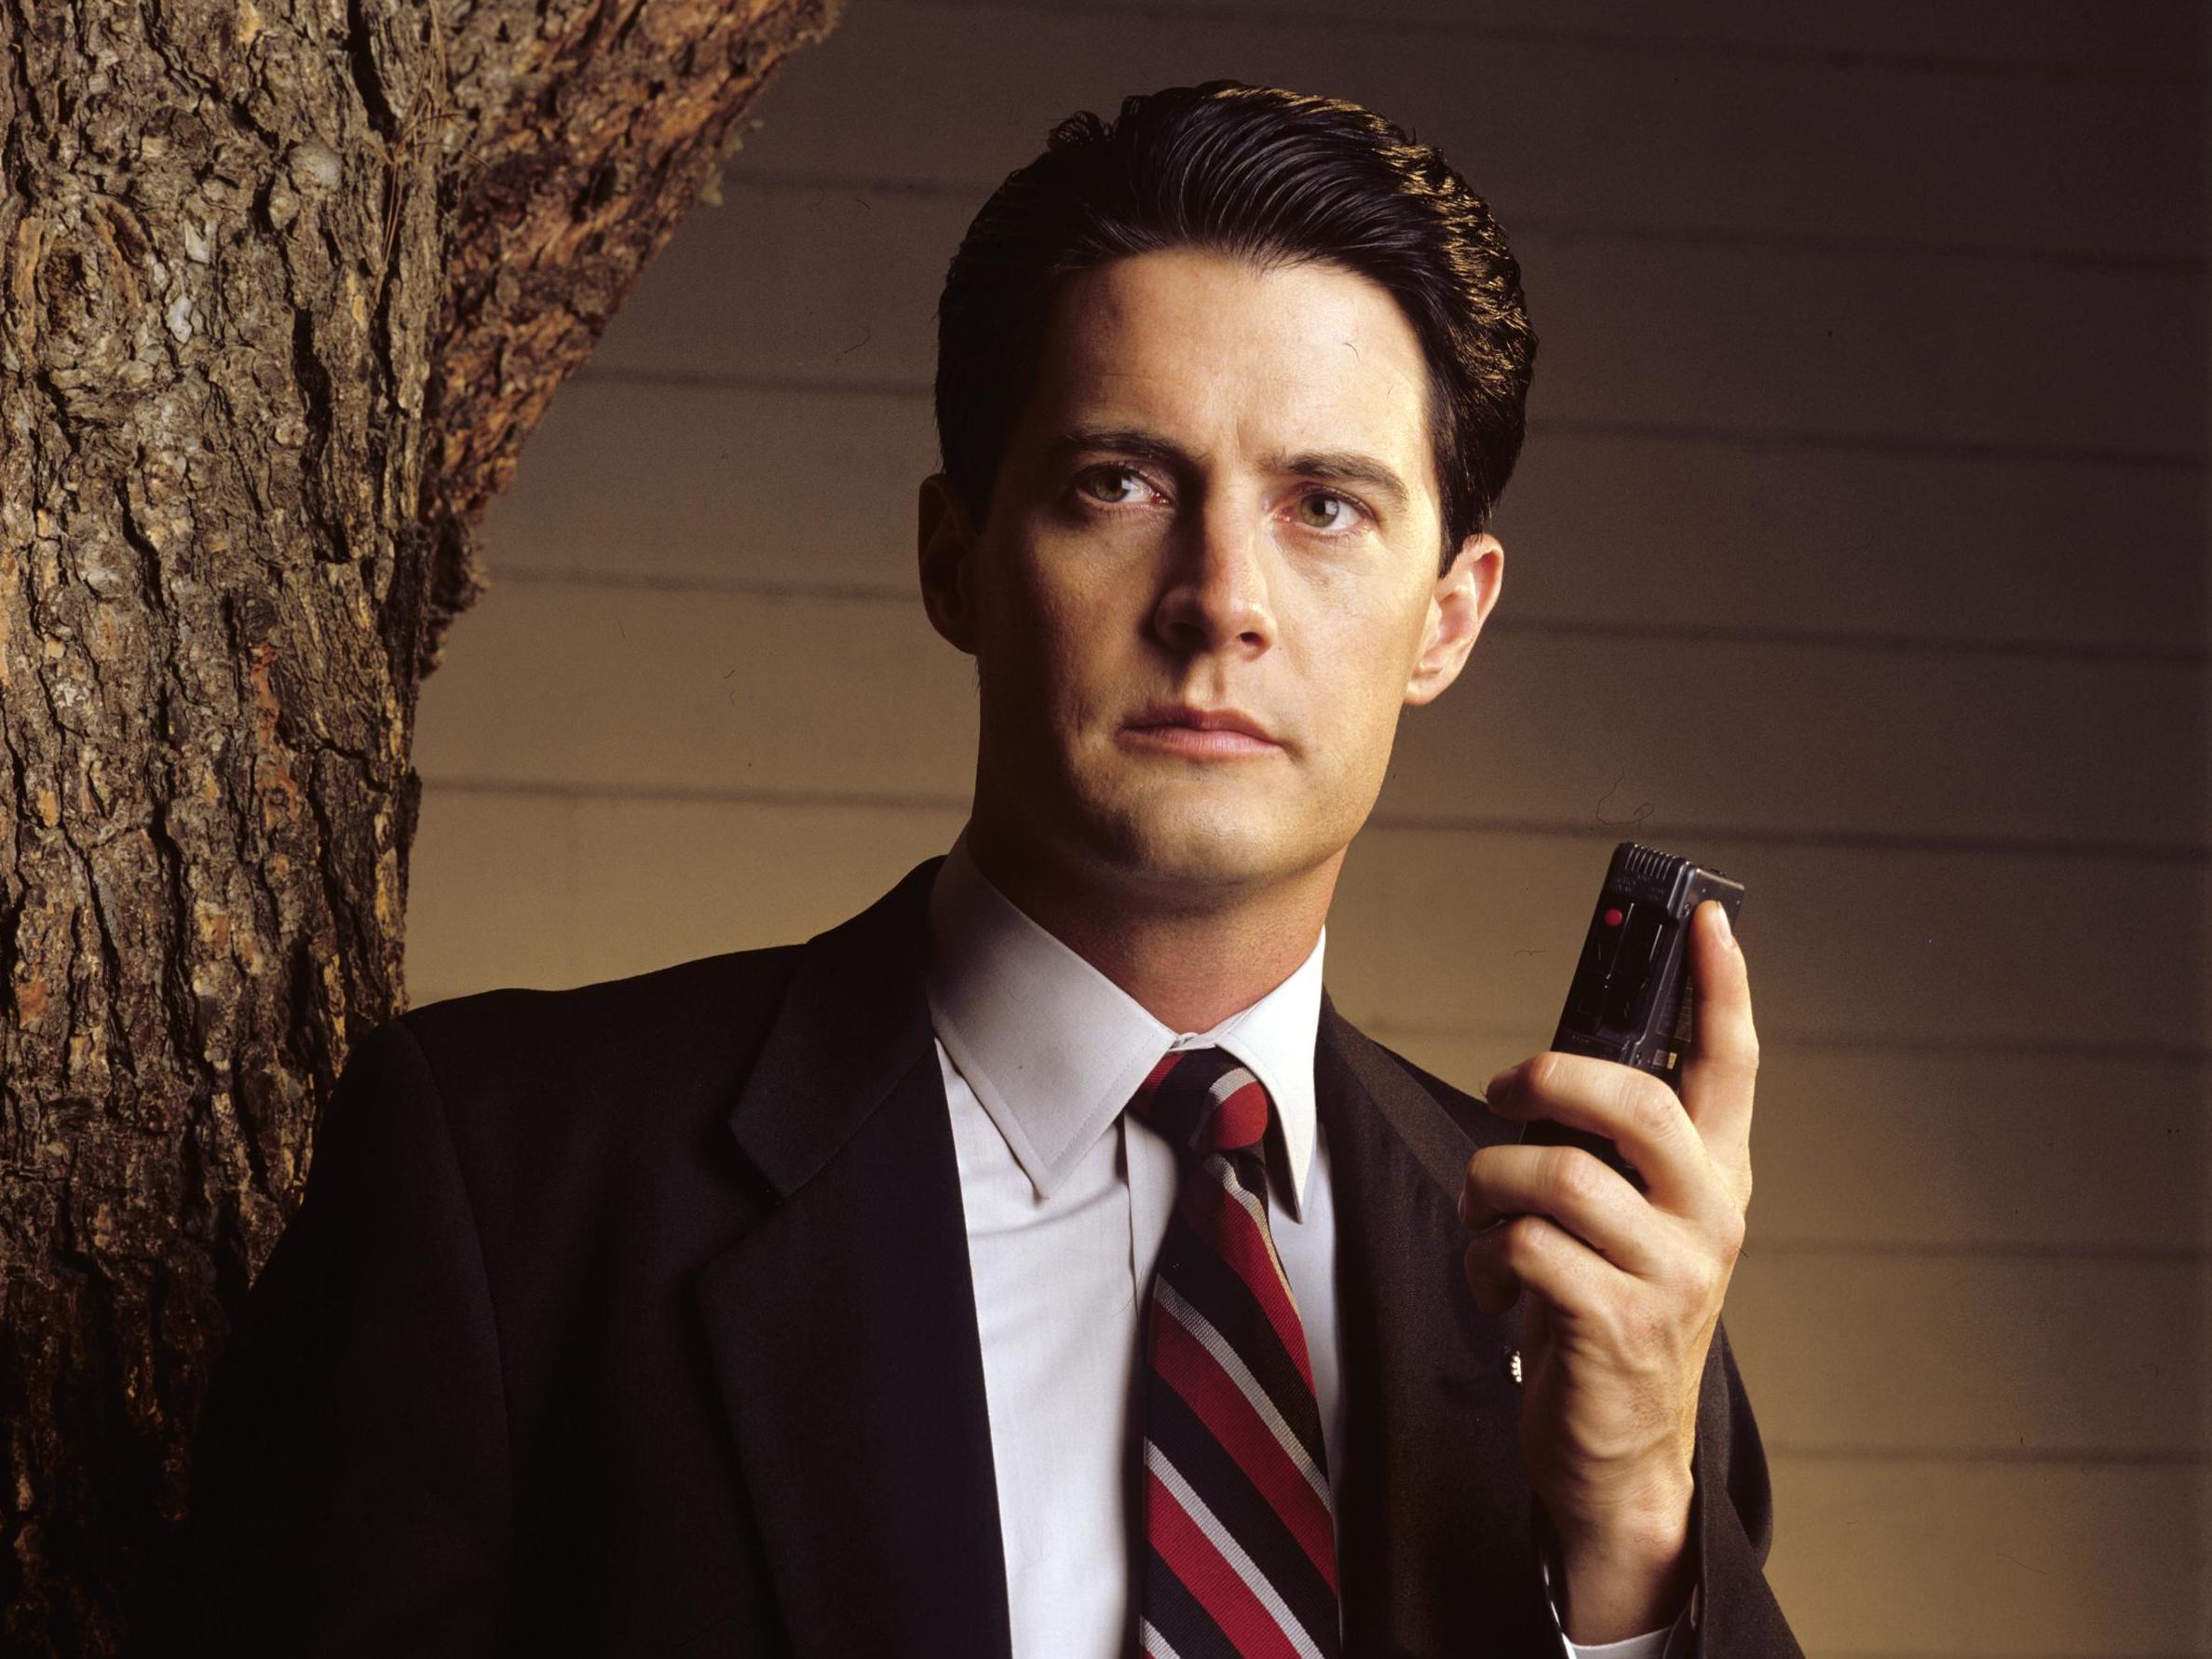 Kyle MacLachlan played the show’s lead, the well-spoken FBI agent Dale Cooper